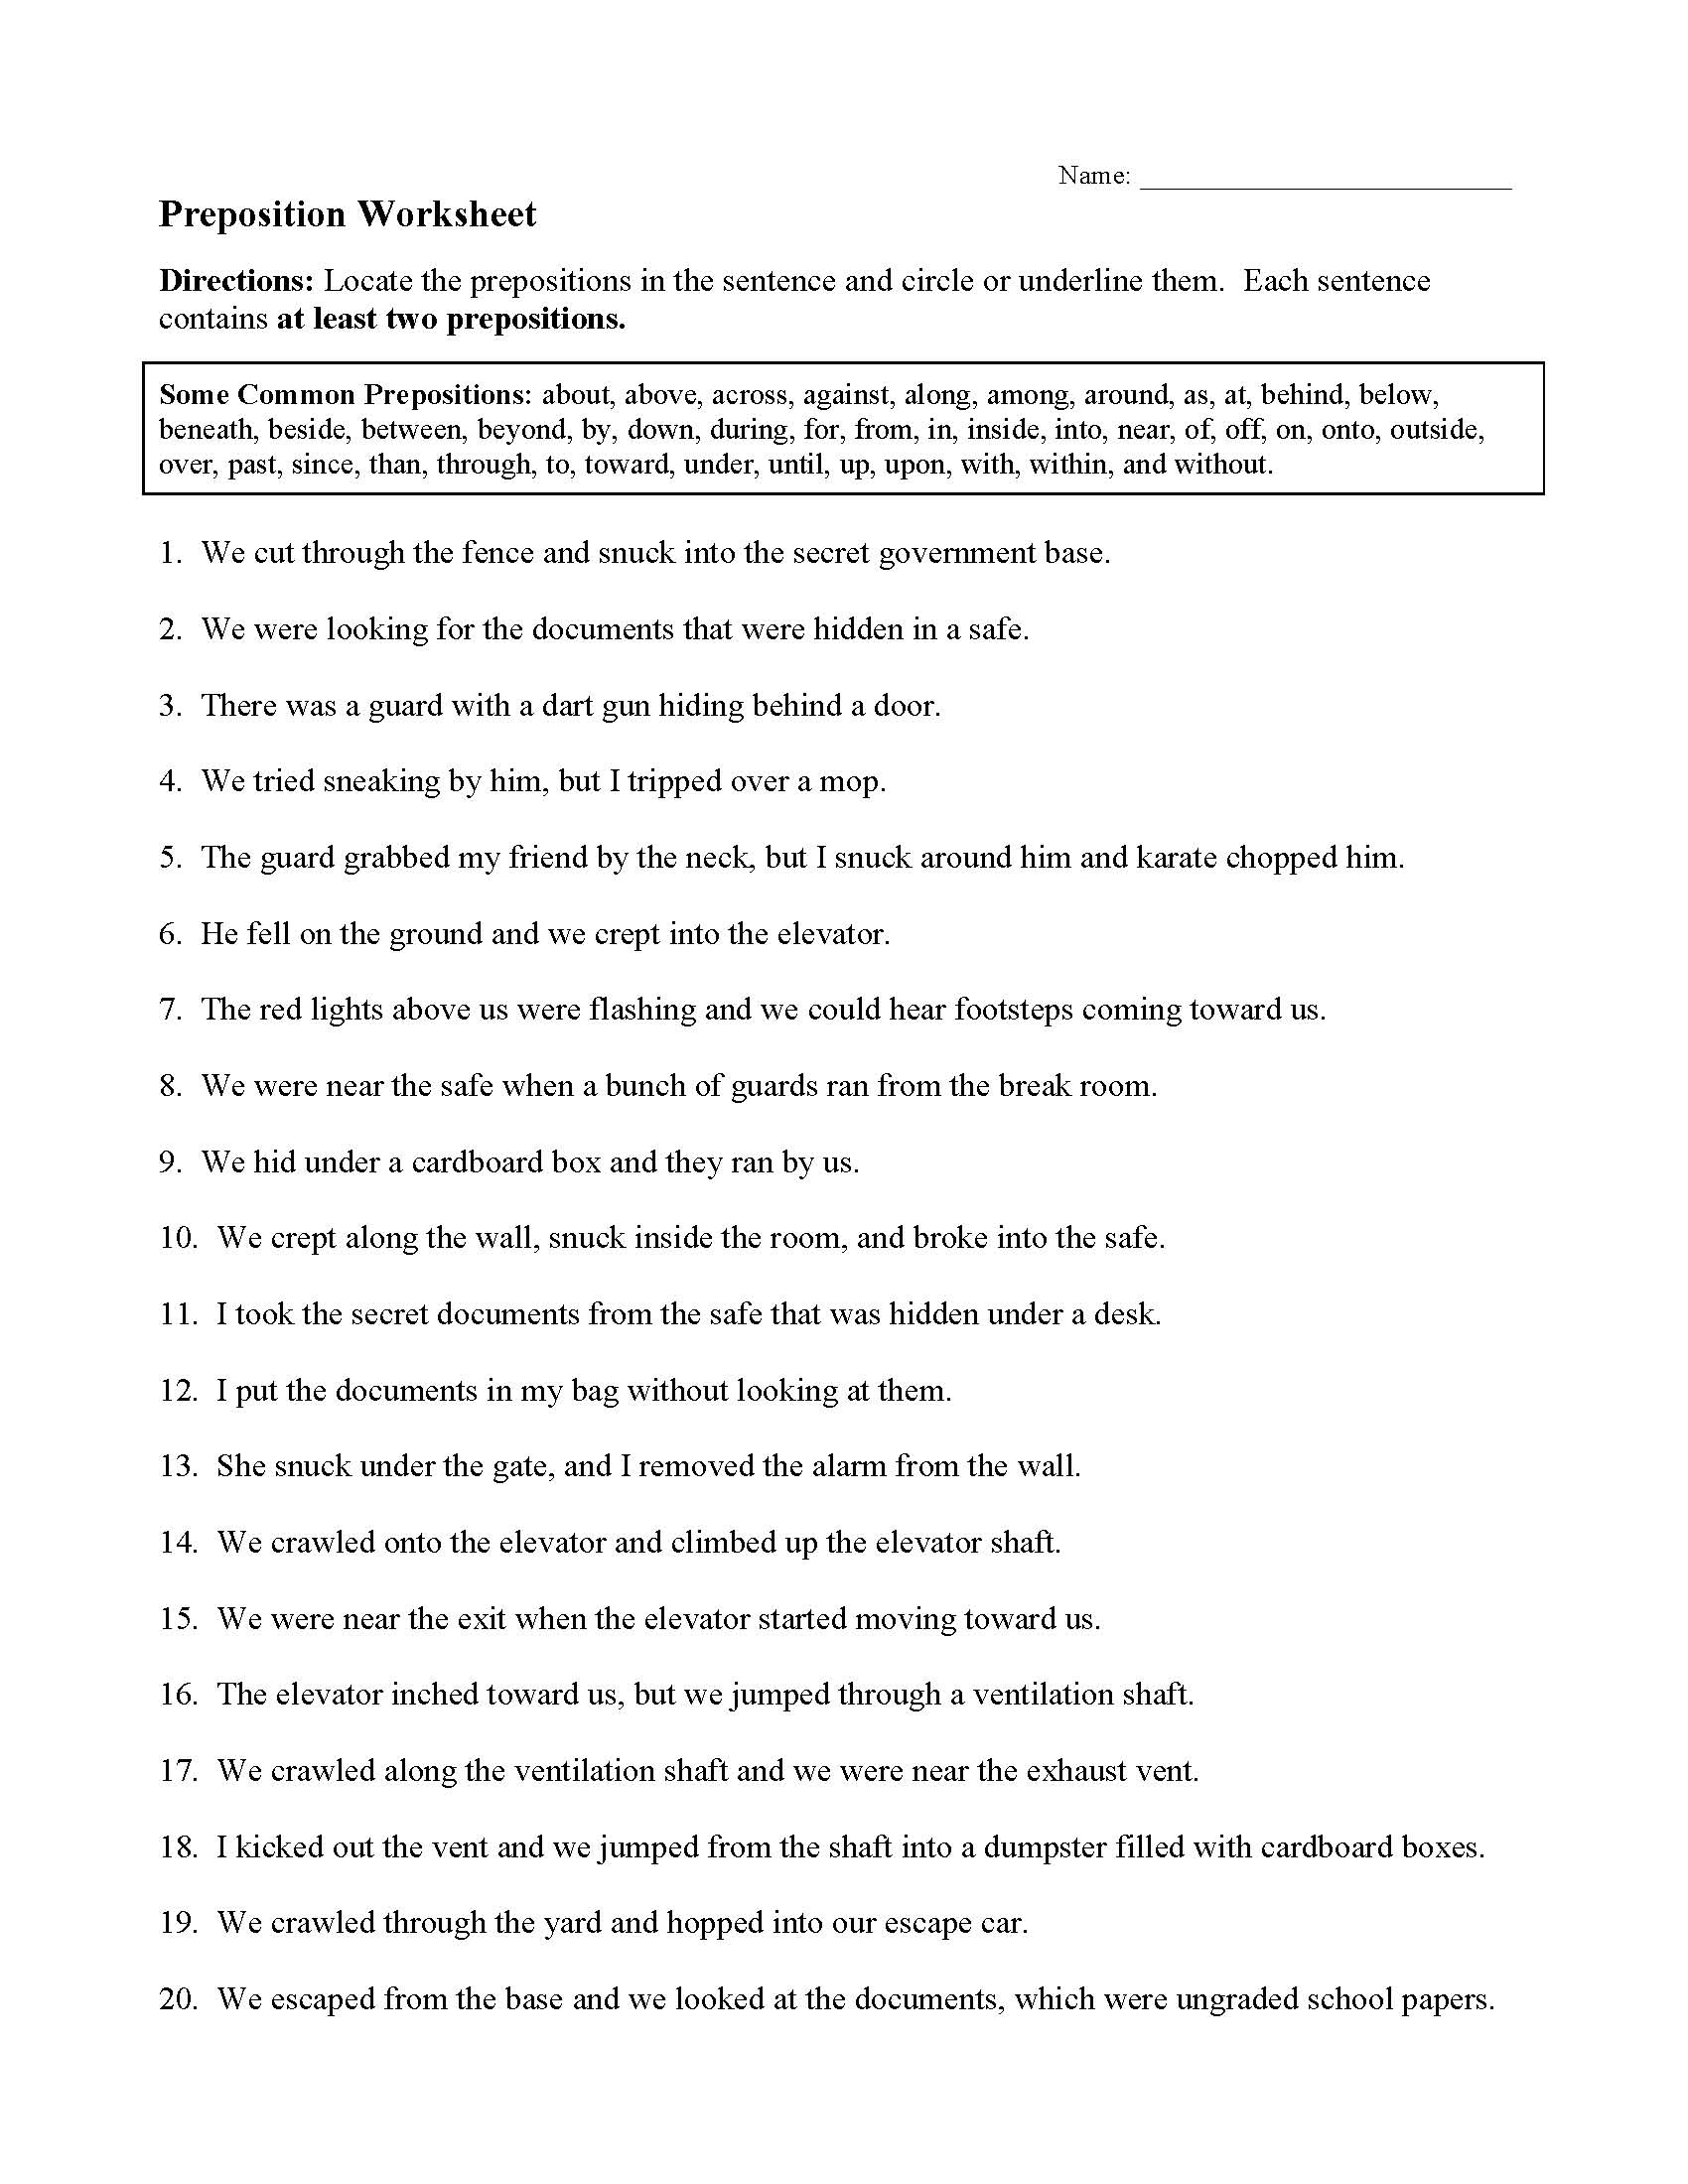 This is a preview image of the Prepositions Worksheet.